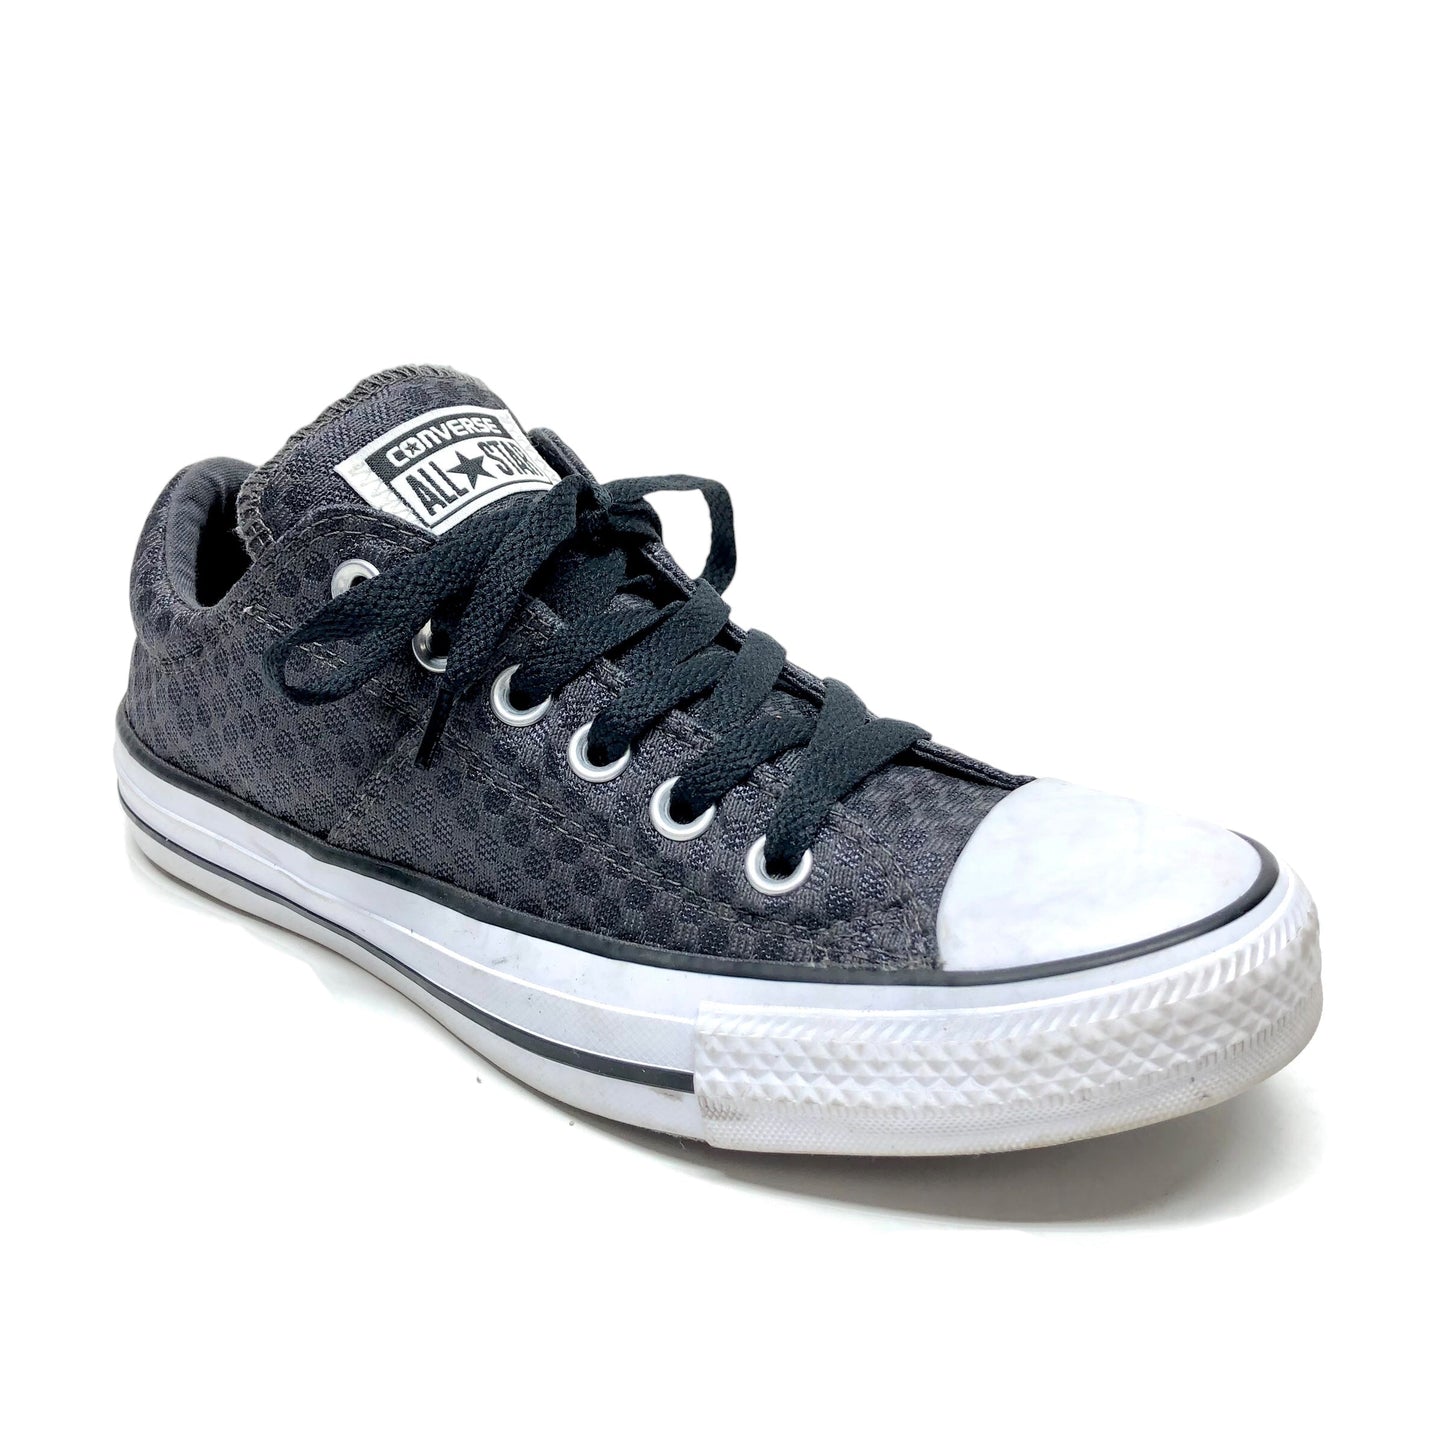 Grey Shoes Sneakers Converse, Size 8